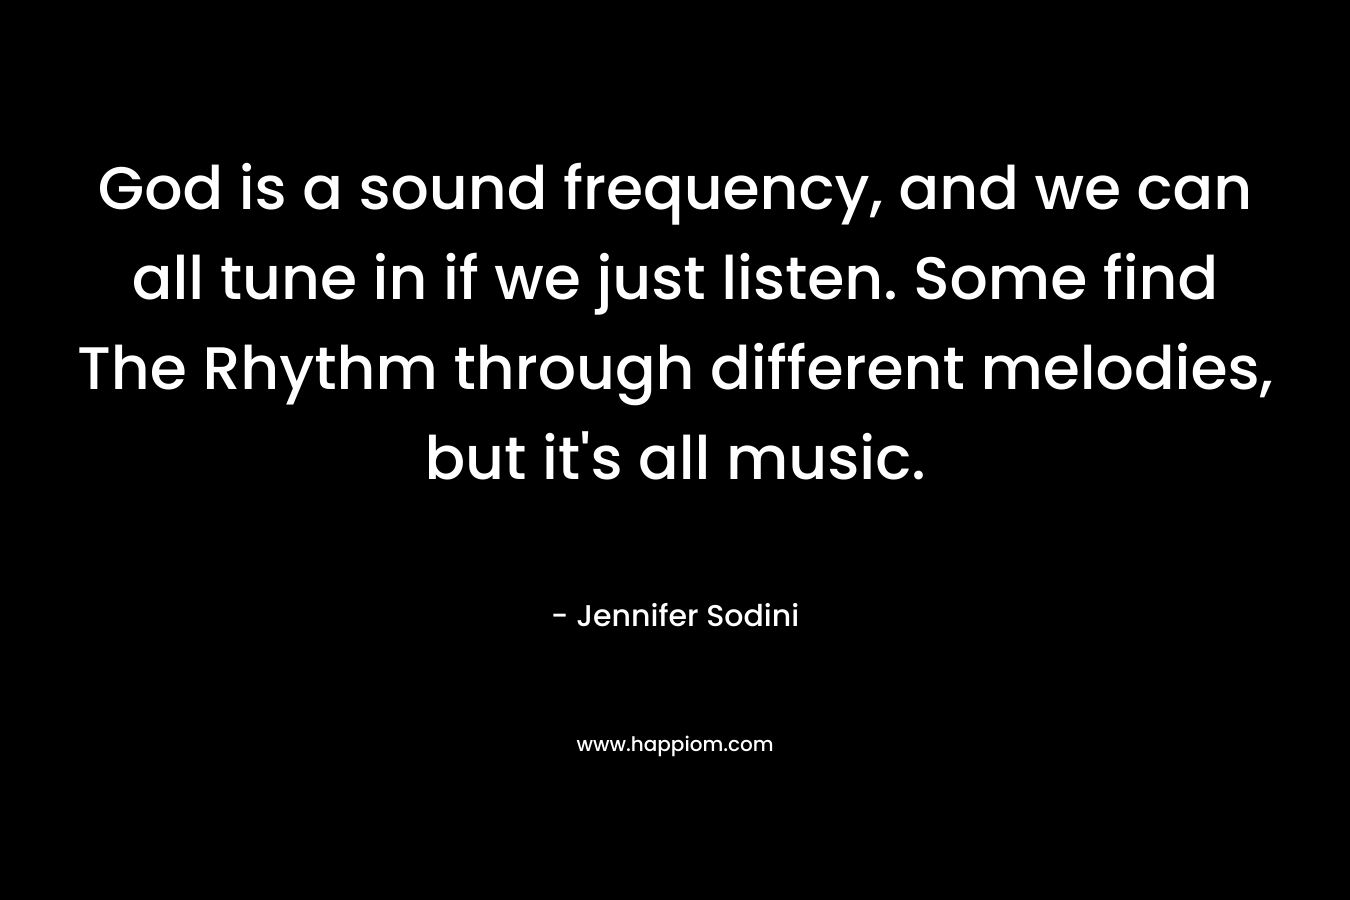 God is a sound frequency, and we can all tune in if we just listen. Some find The Rhythm through different melodies, but it's all music.